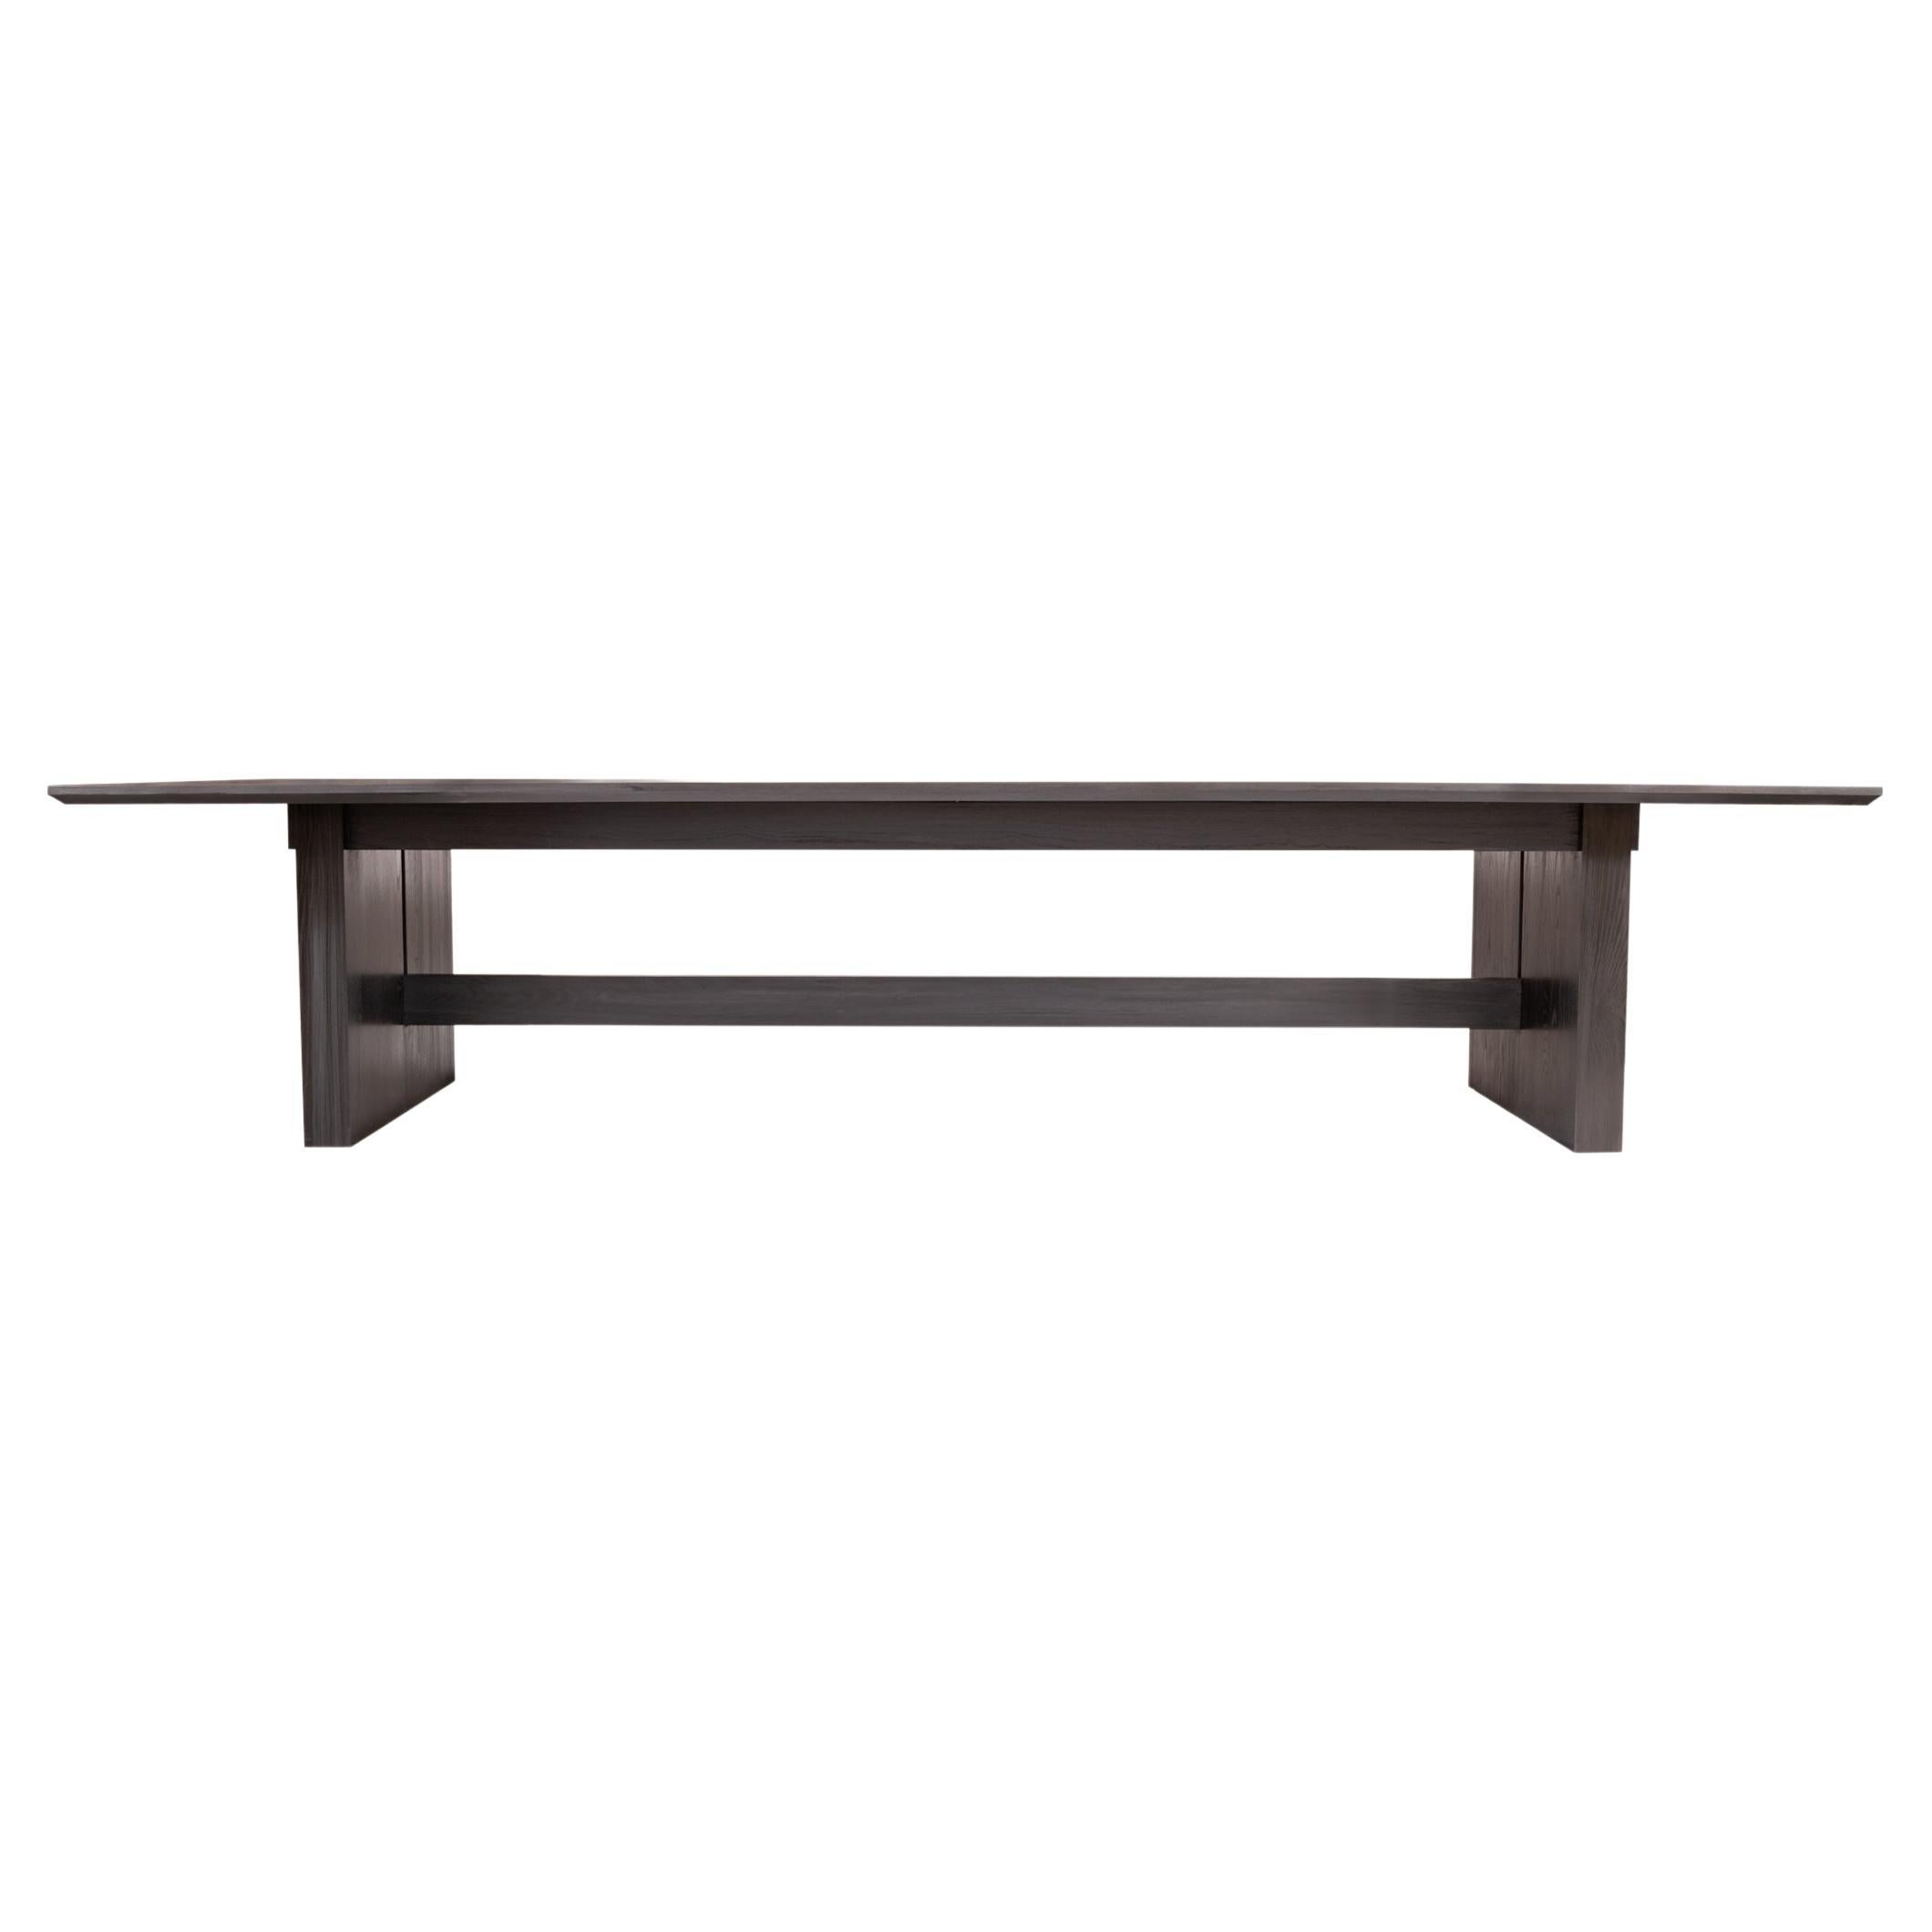 Magnolia Conference Table in Blackened Ash with Chamfered Knife Edge